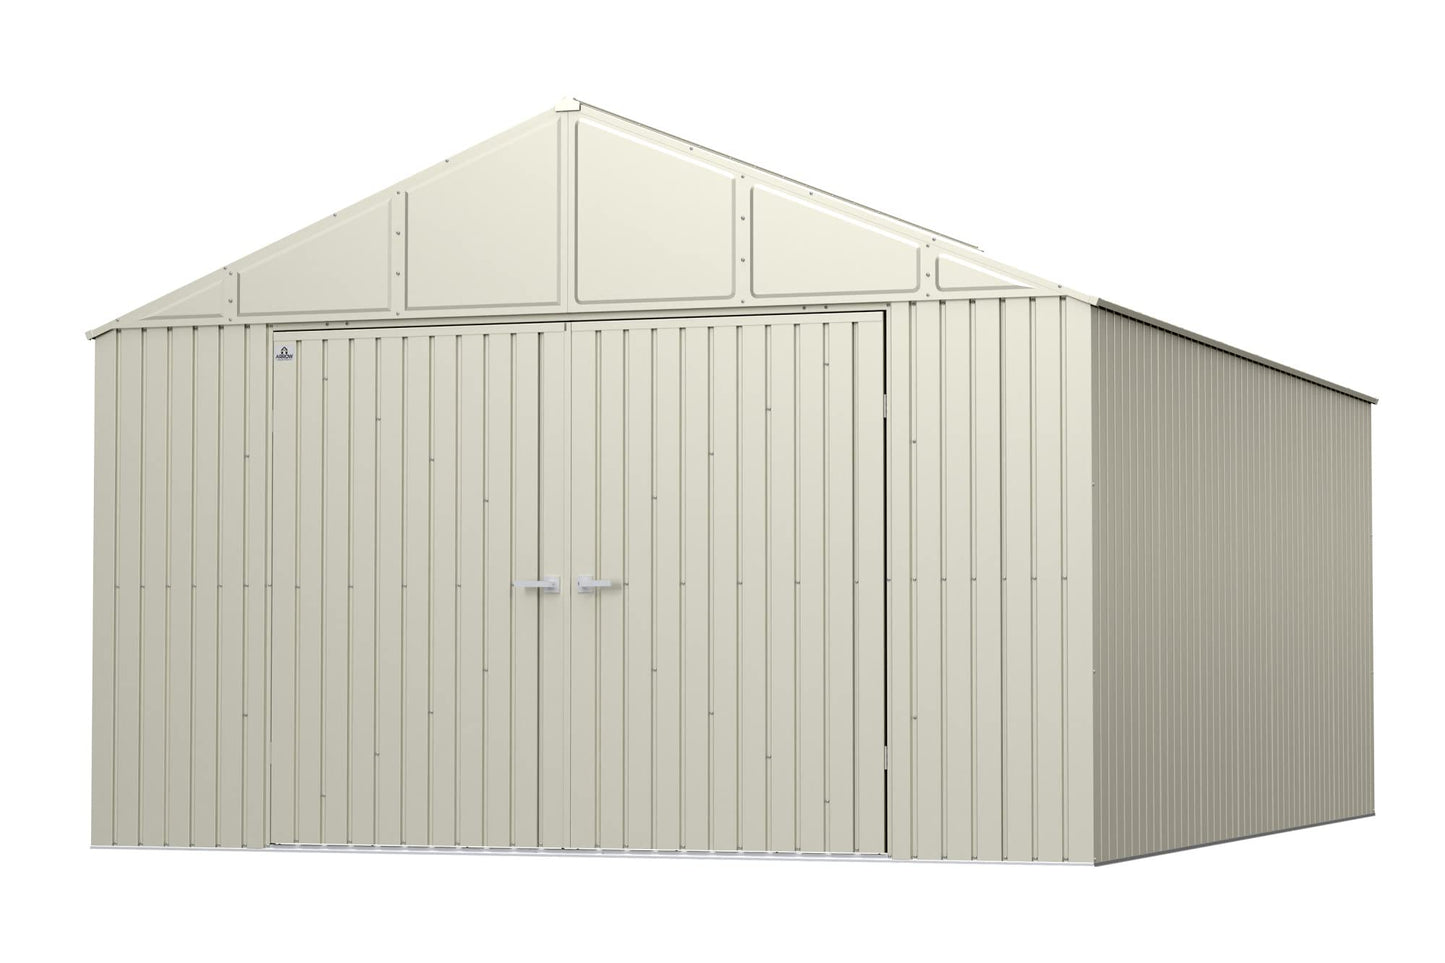 Arrow Shed Elite 12' x 16' Outdoor Lockable Gable Roof Steel Storage Shed Building, Cool Grey